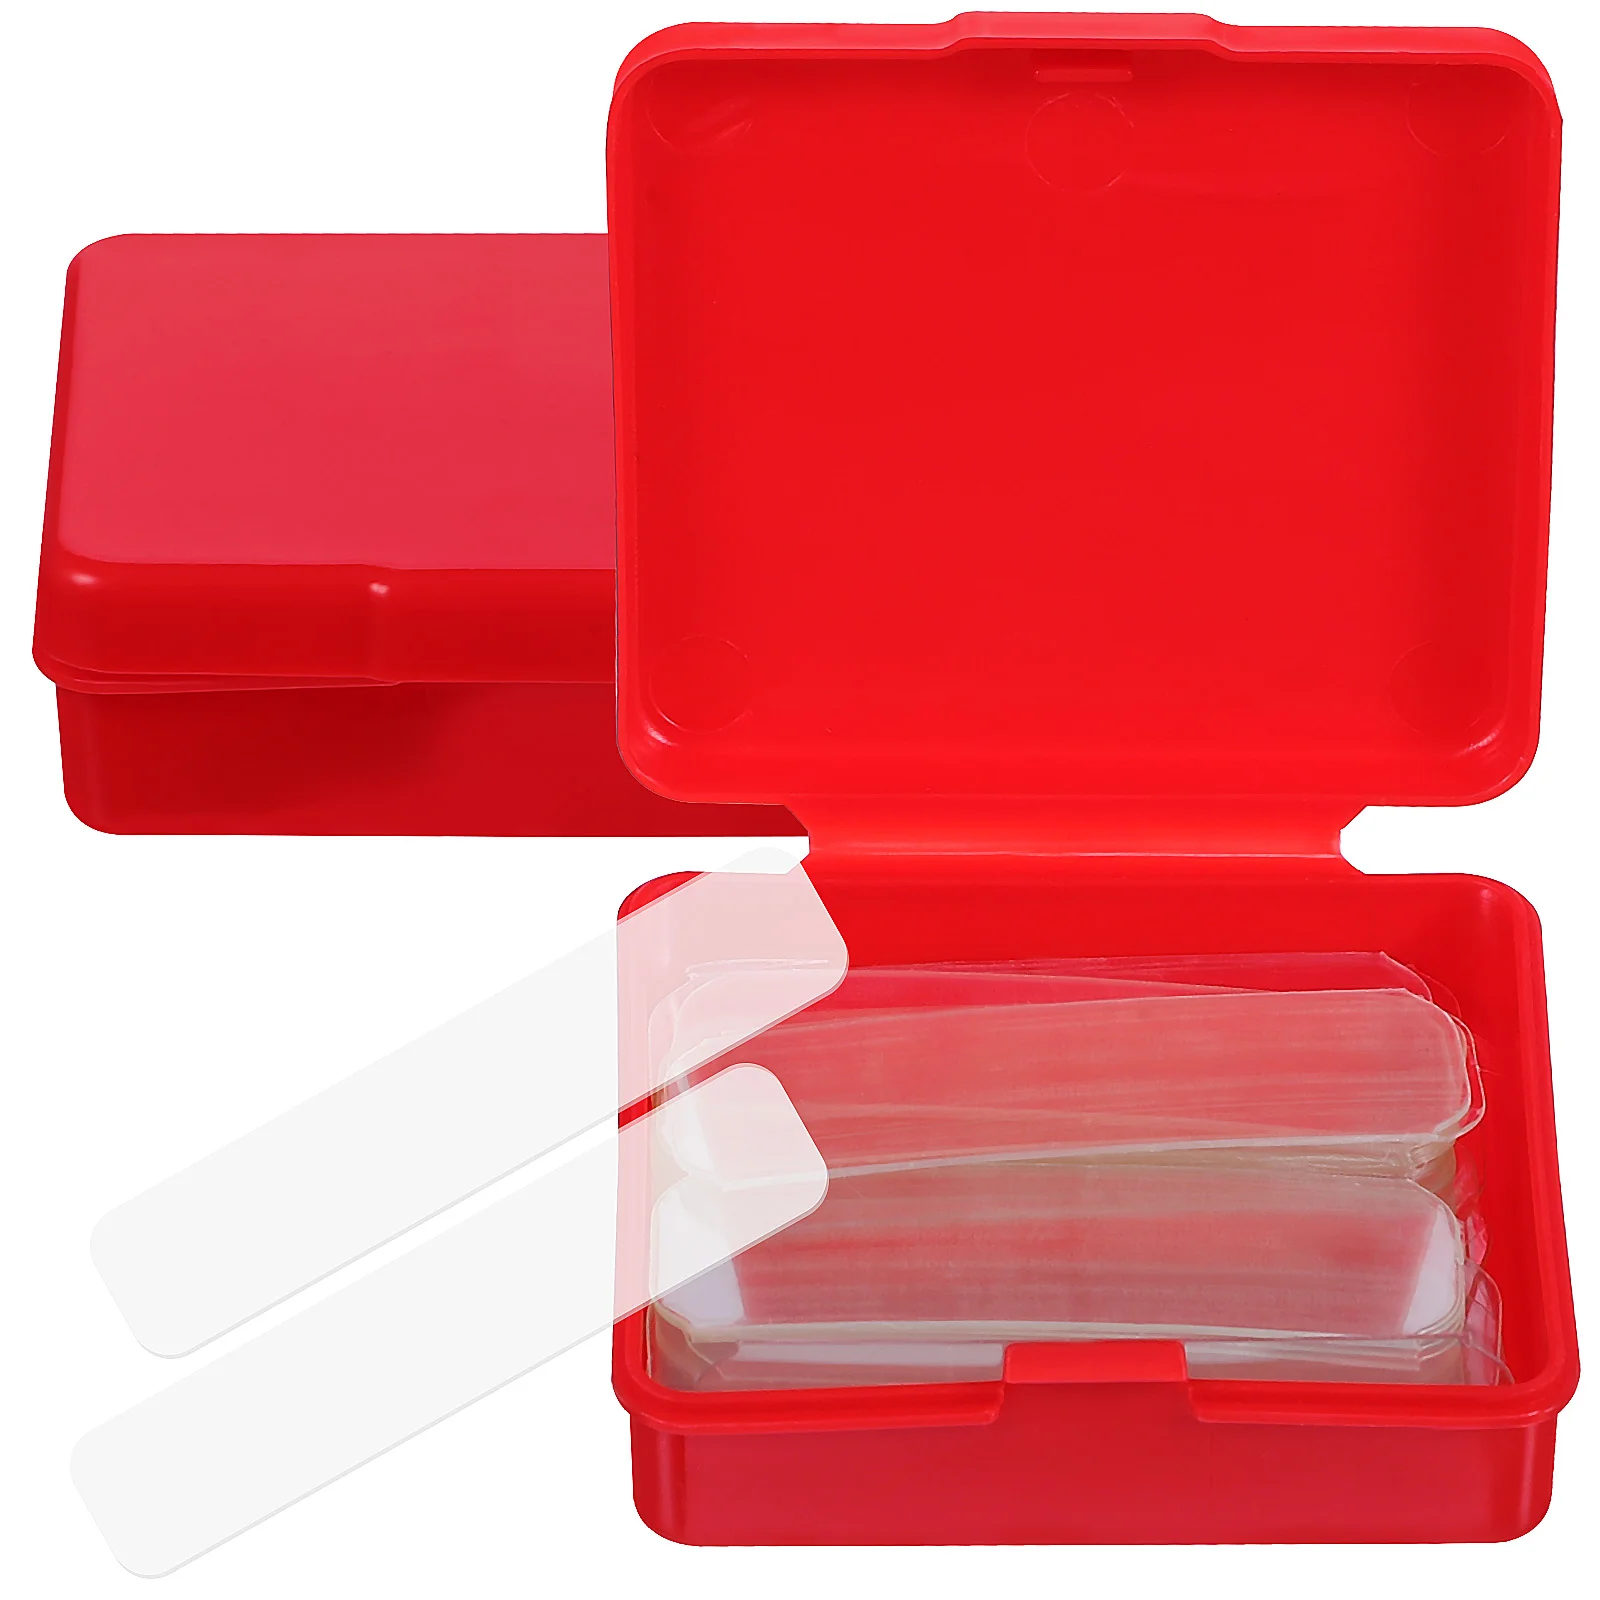 

2 Boxes Glue Tape Reusable Double Sided Cuttable Mounting Plastic Removable Adhesive Strips Child